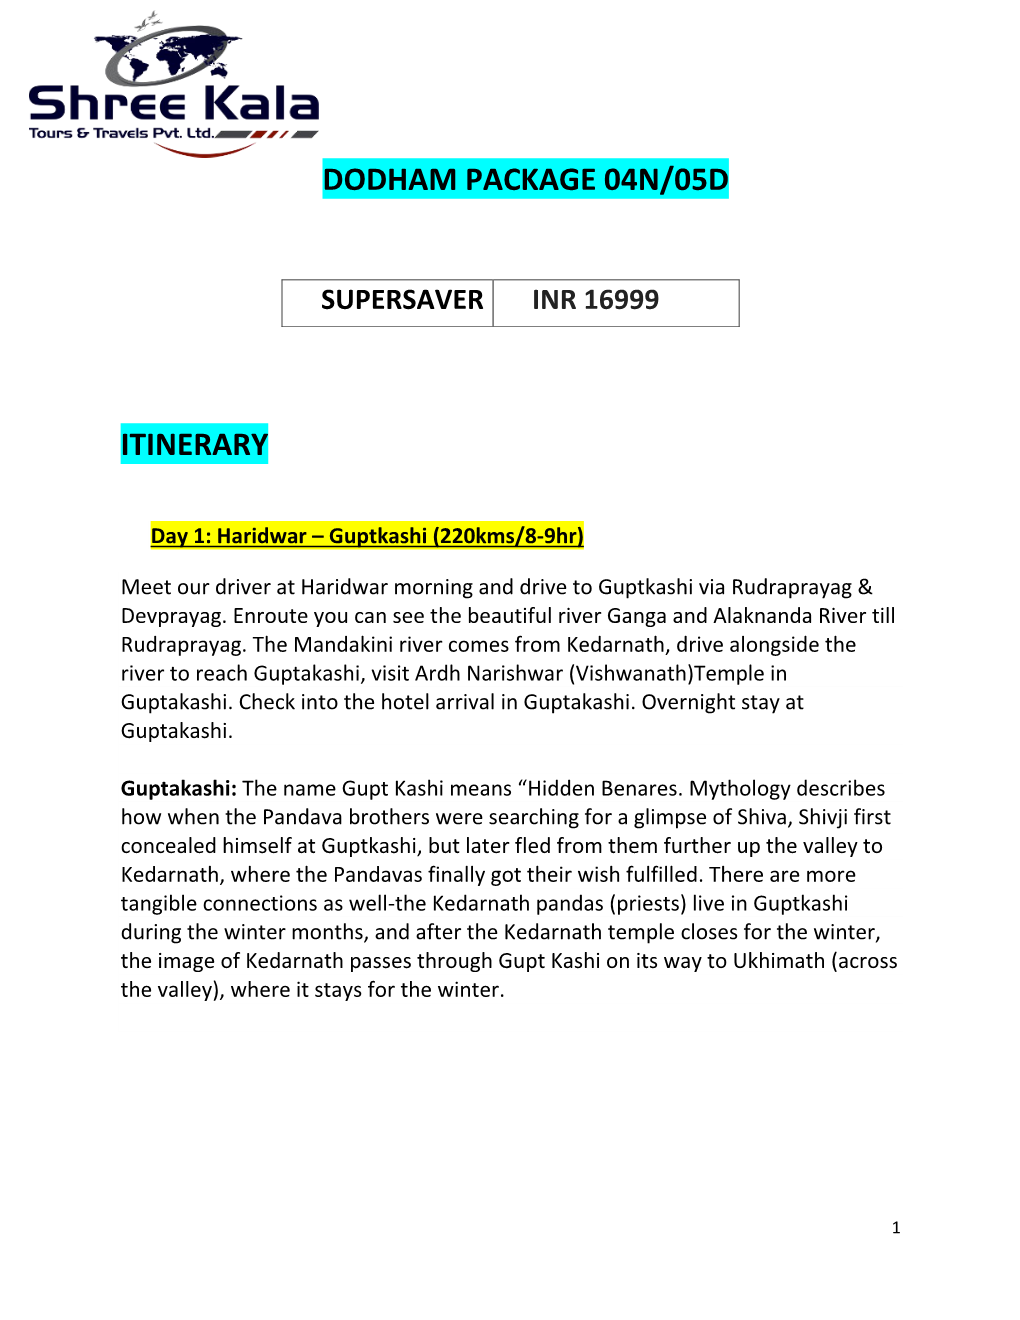 Dodham Package 04N/05D Itinerary